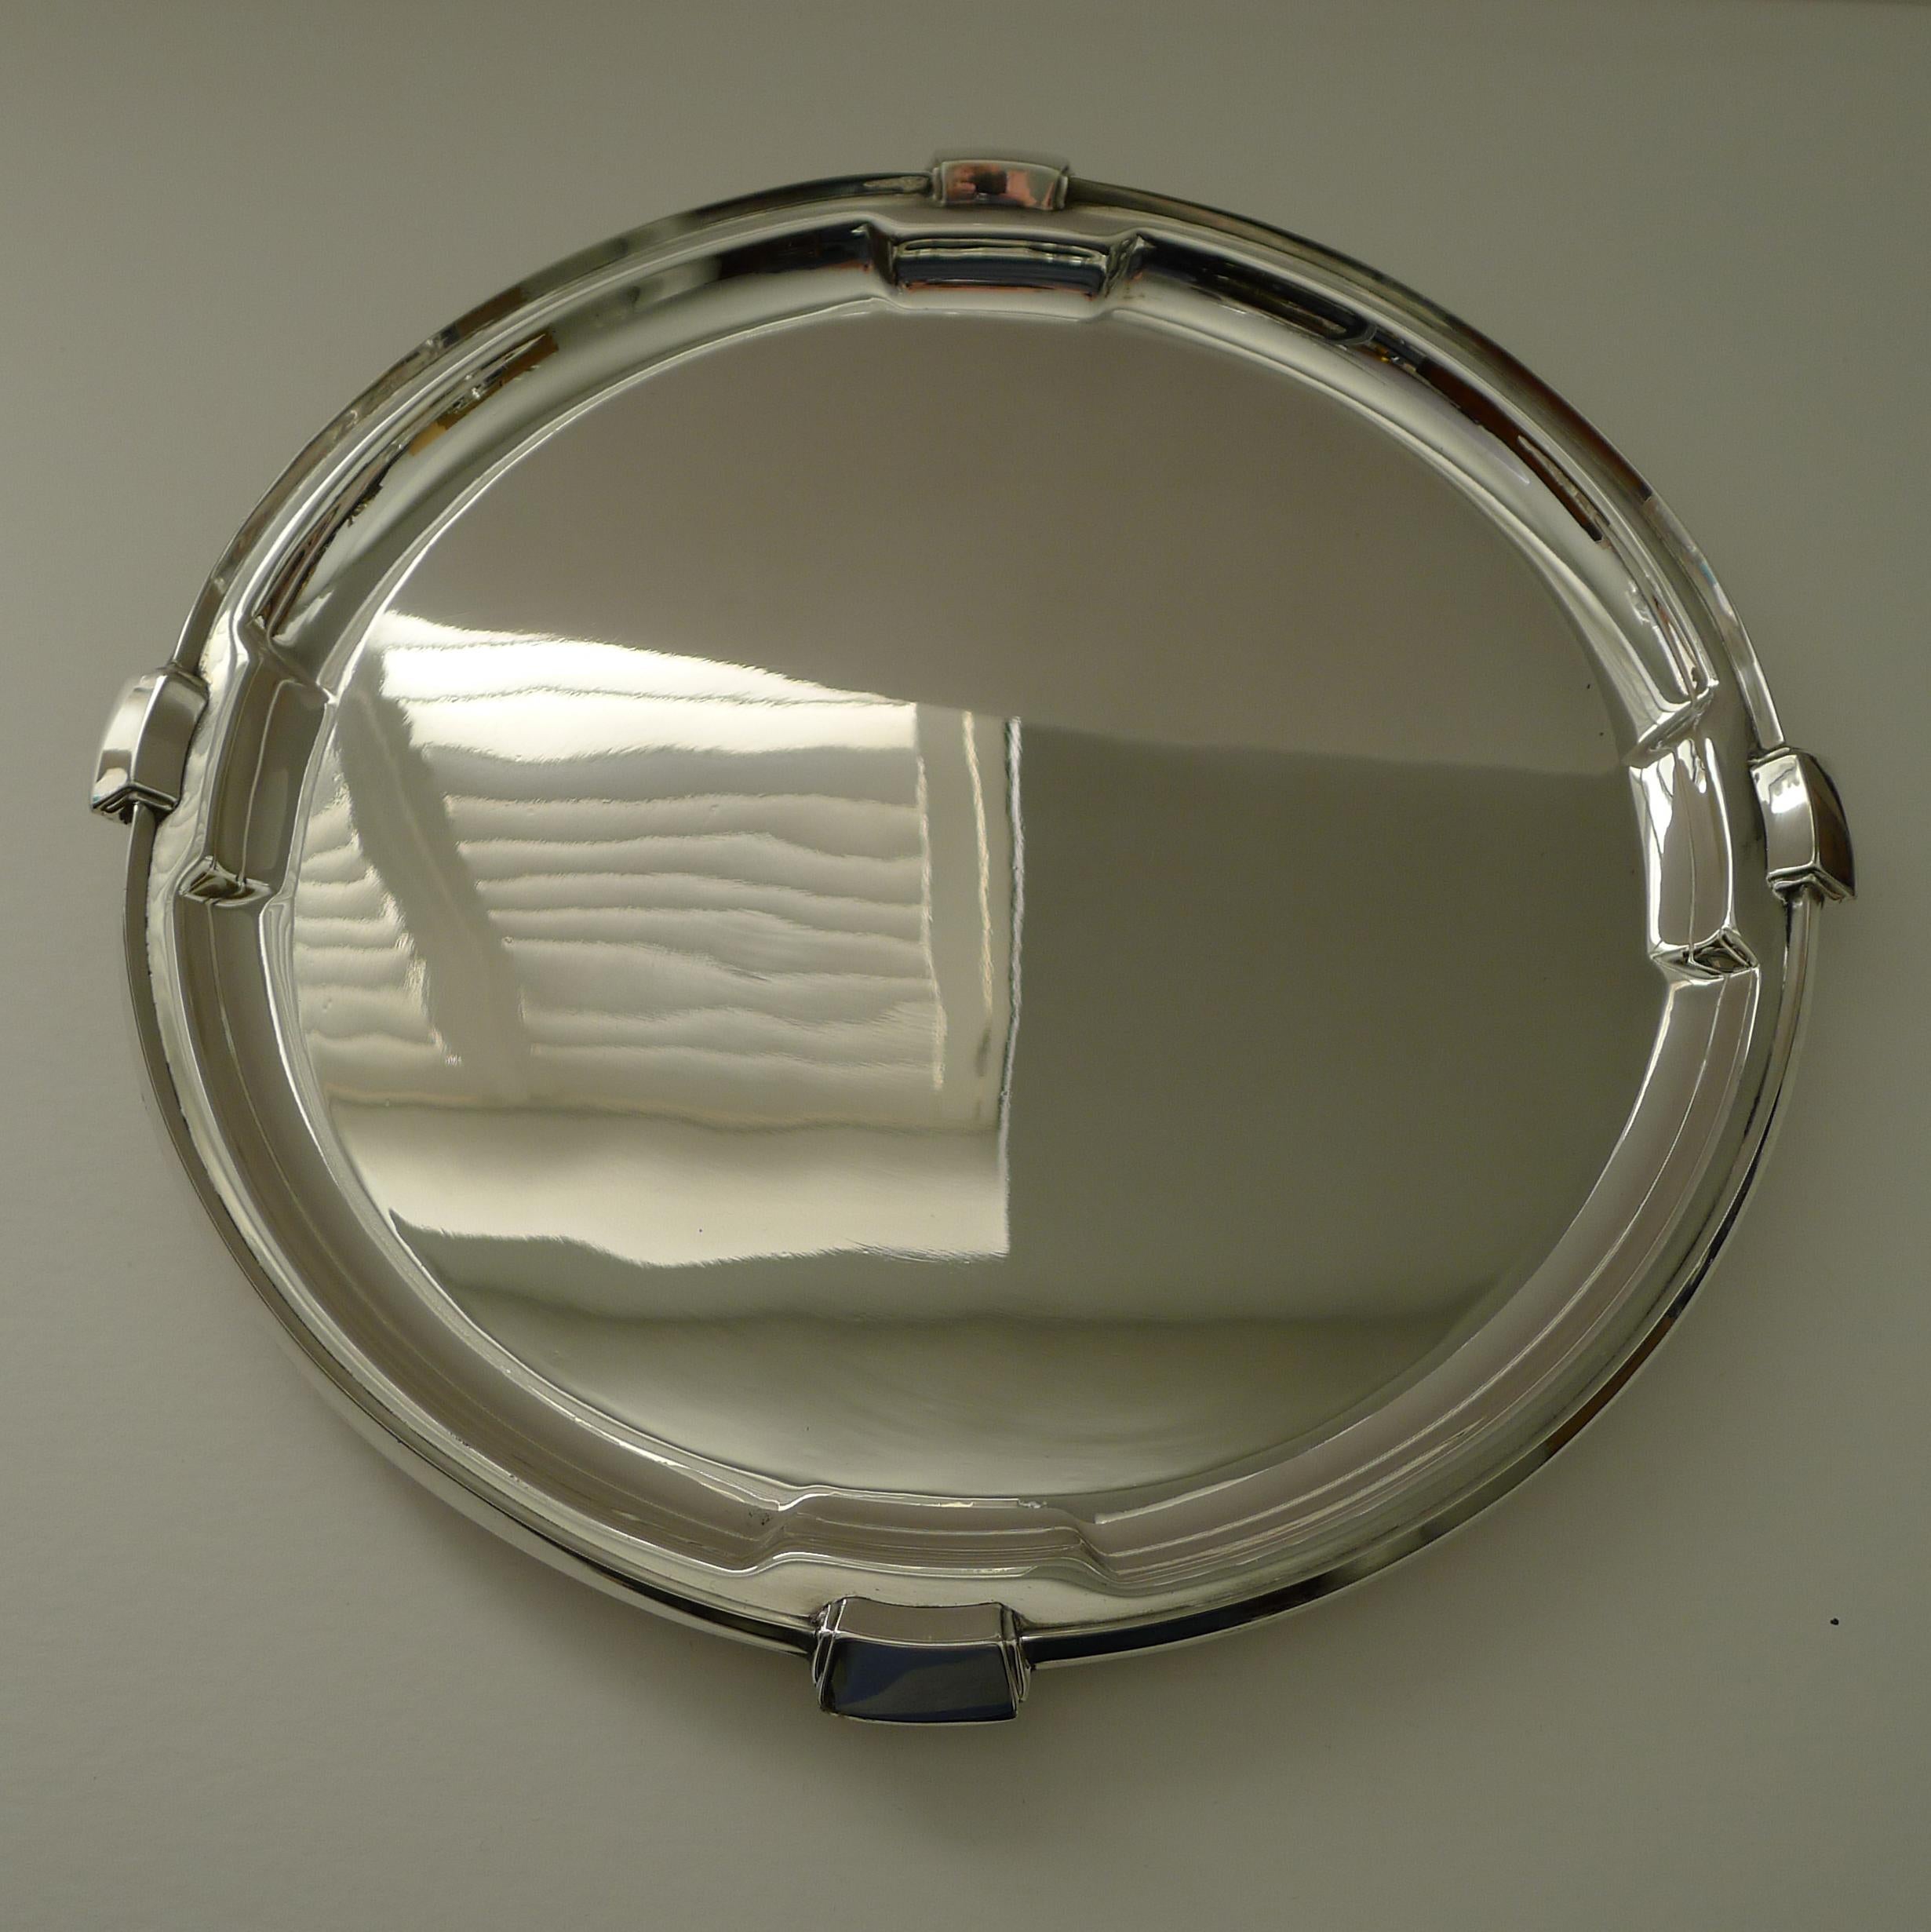 Smart Art Deco Silver Plated Cocktail Tray by Walker & Hall 1